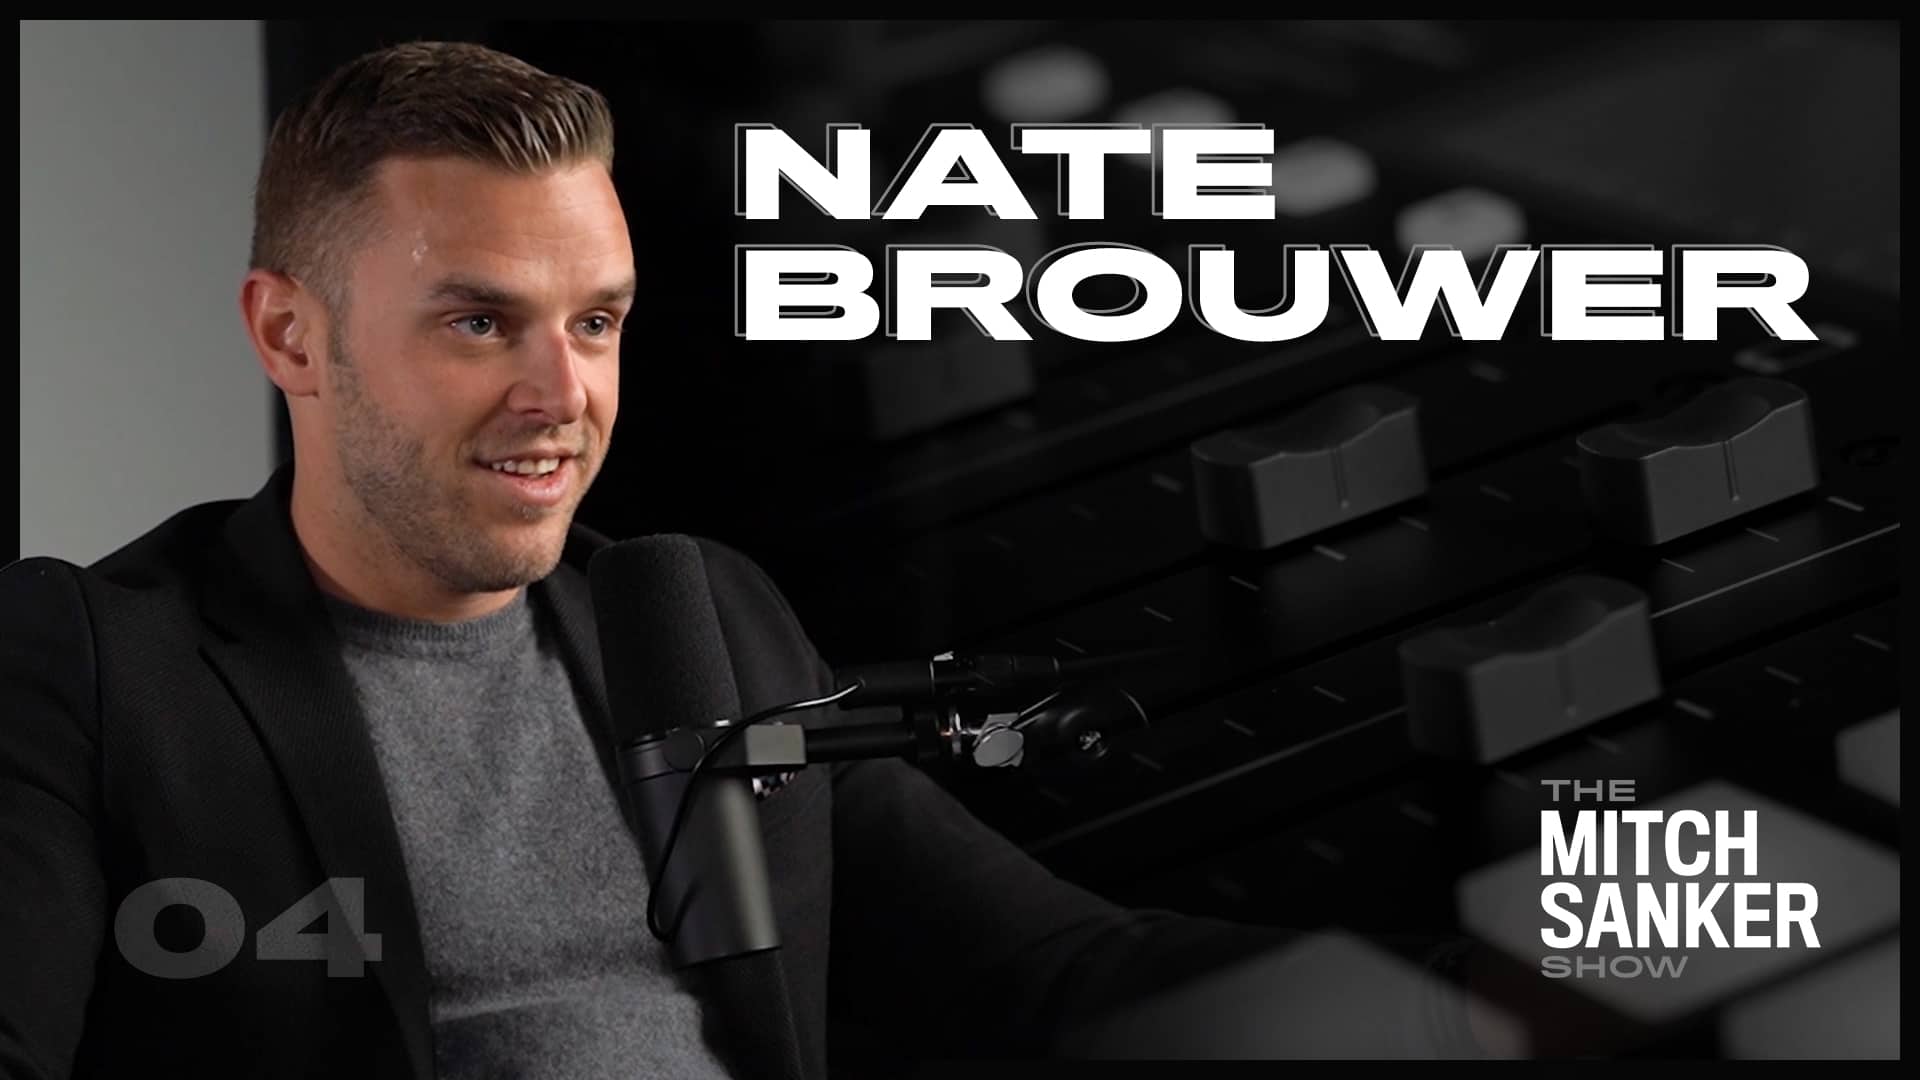 Read more about the article The Mitch Sanker Show – Episode 04 featuring Nate Brouwer